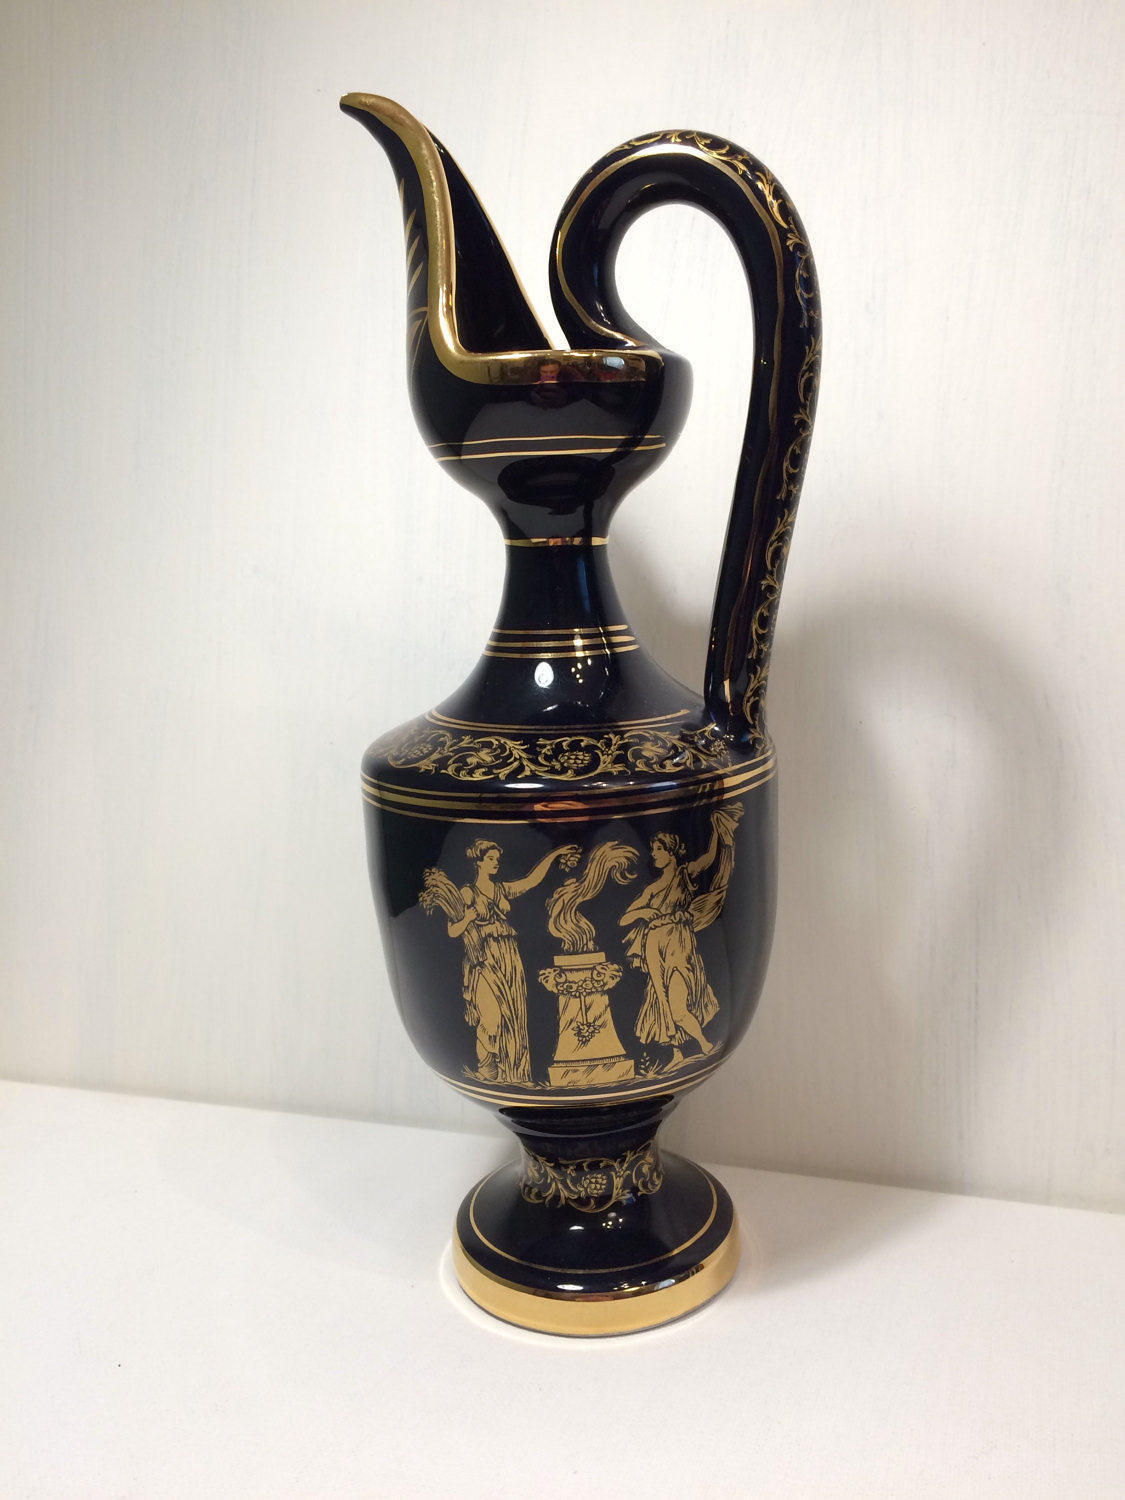 gold satsuma vase of vase made in greece luxe vase pertaining to vase made in greece luxe